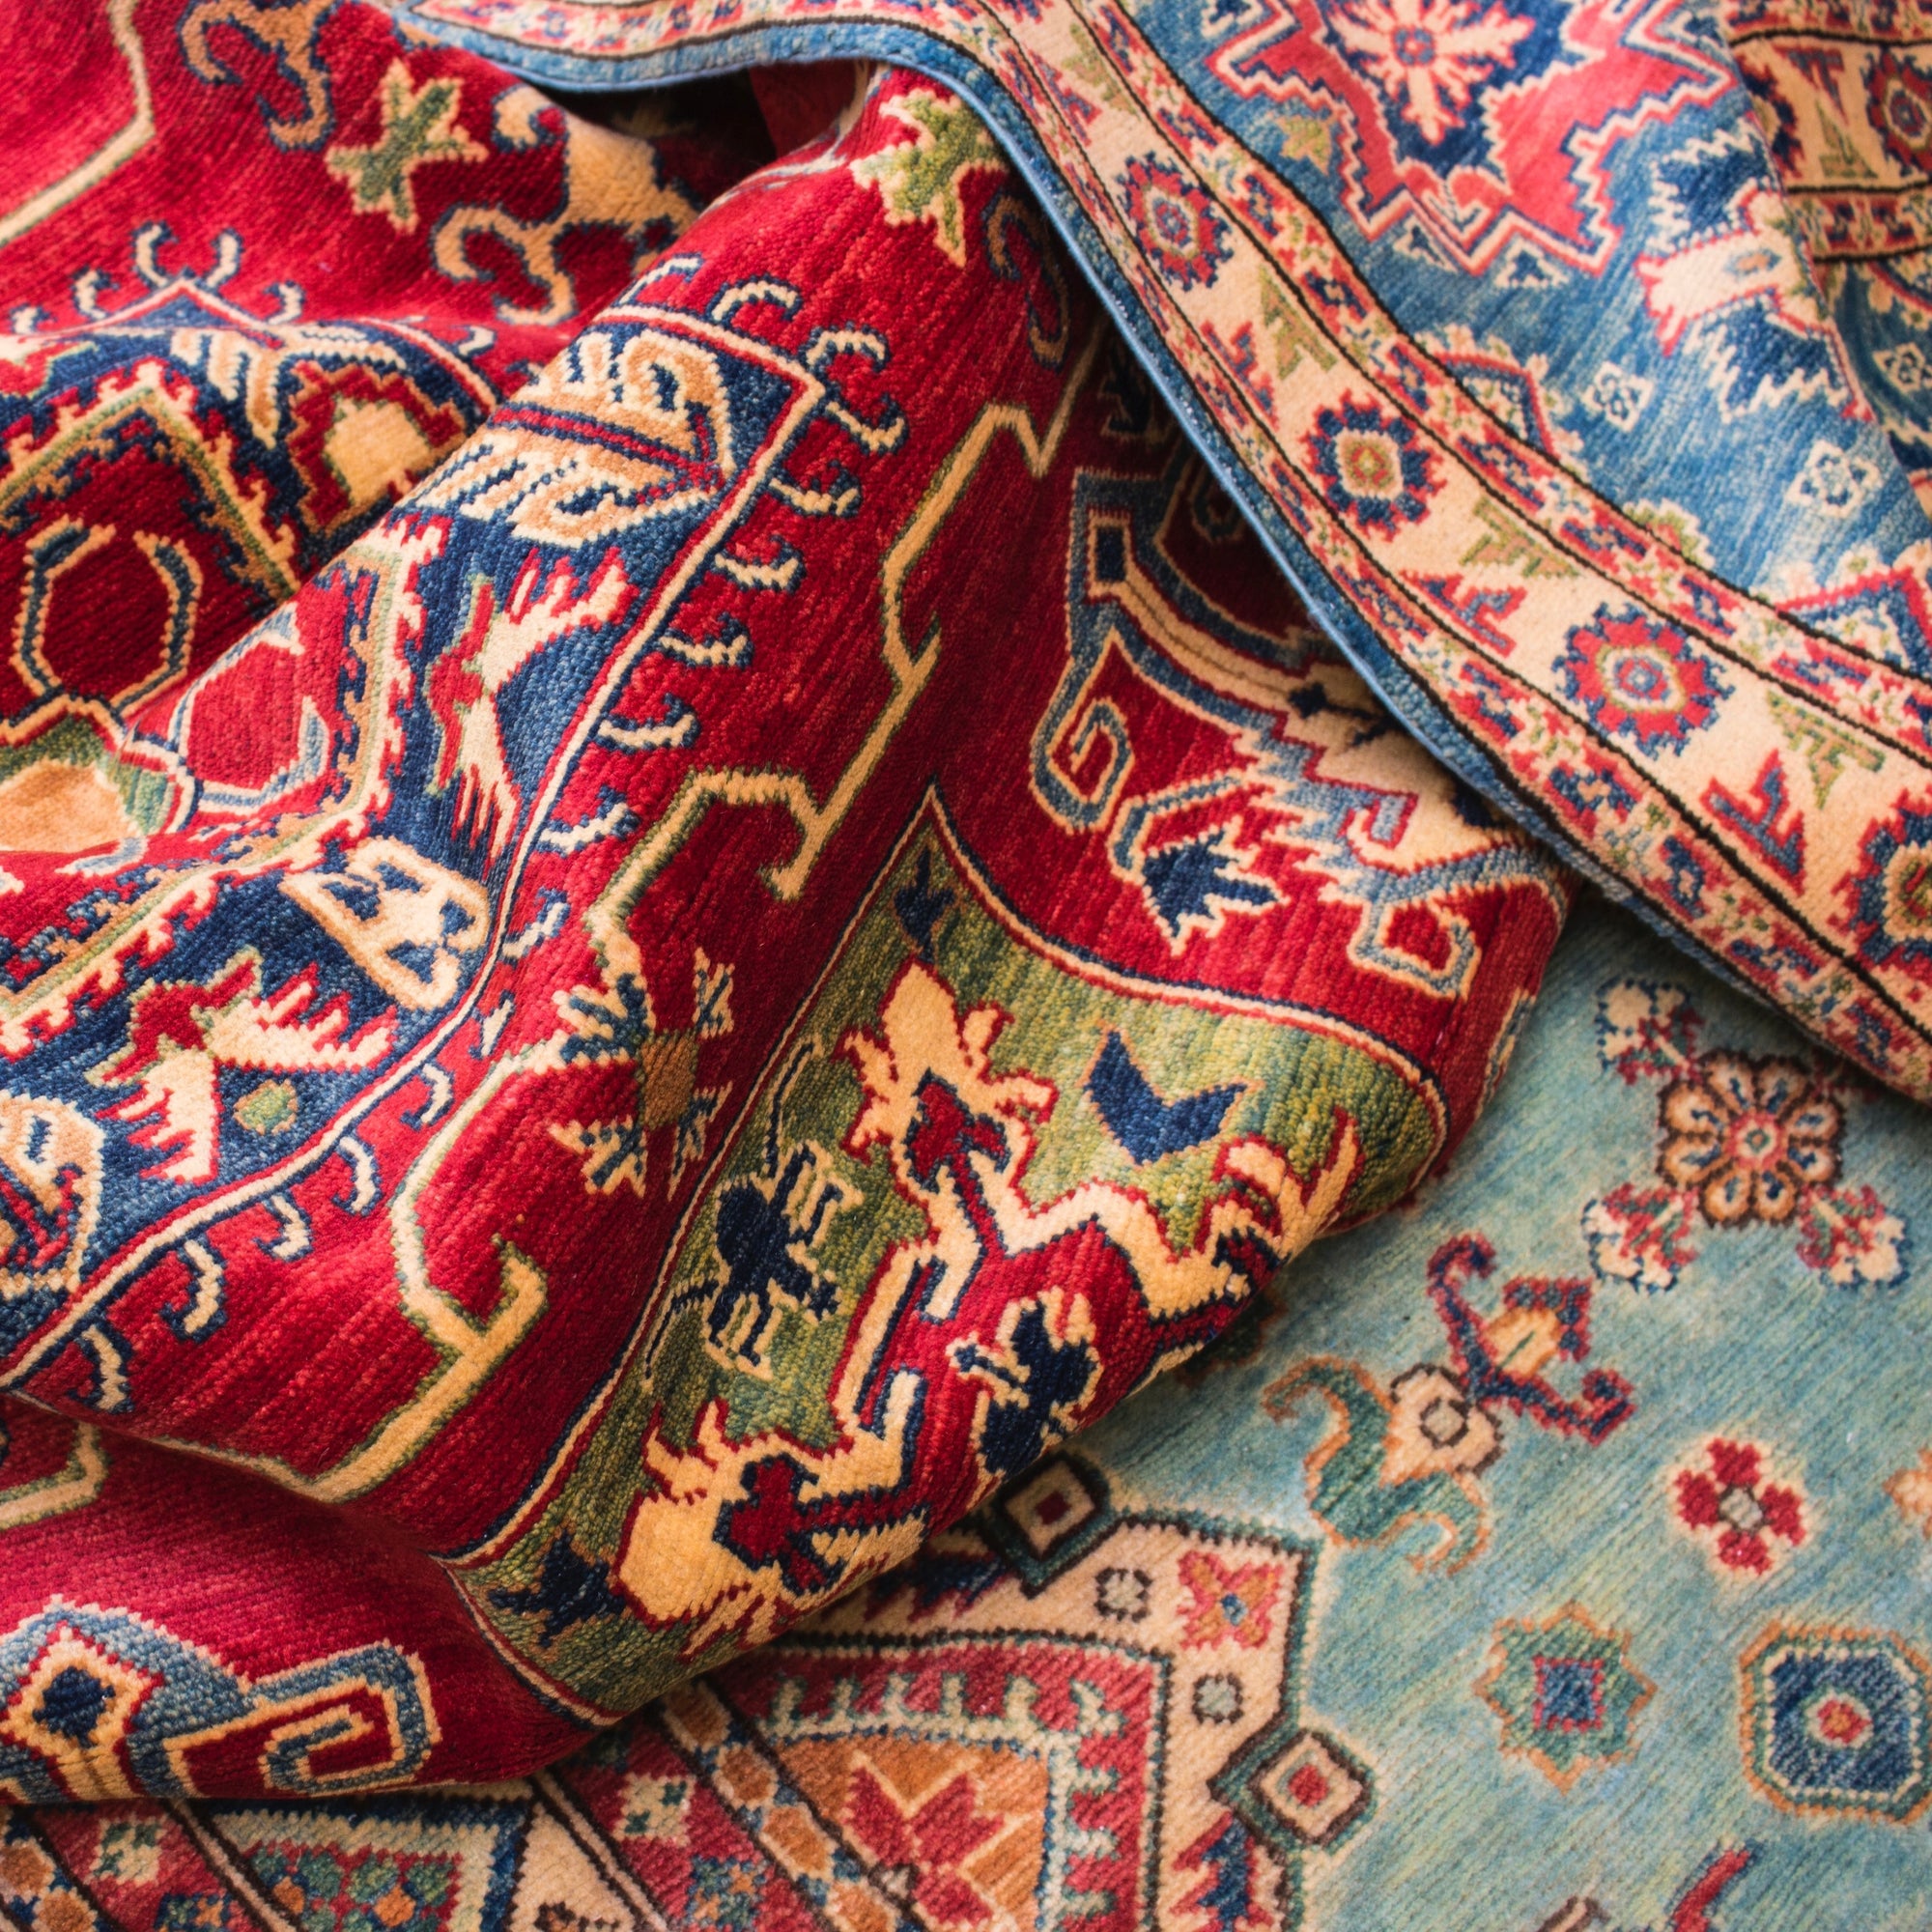 Types of Indian Rugs to Know Before You Shop